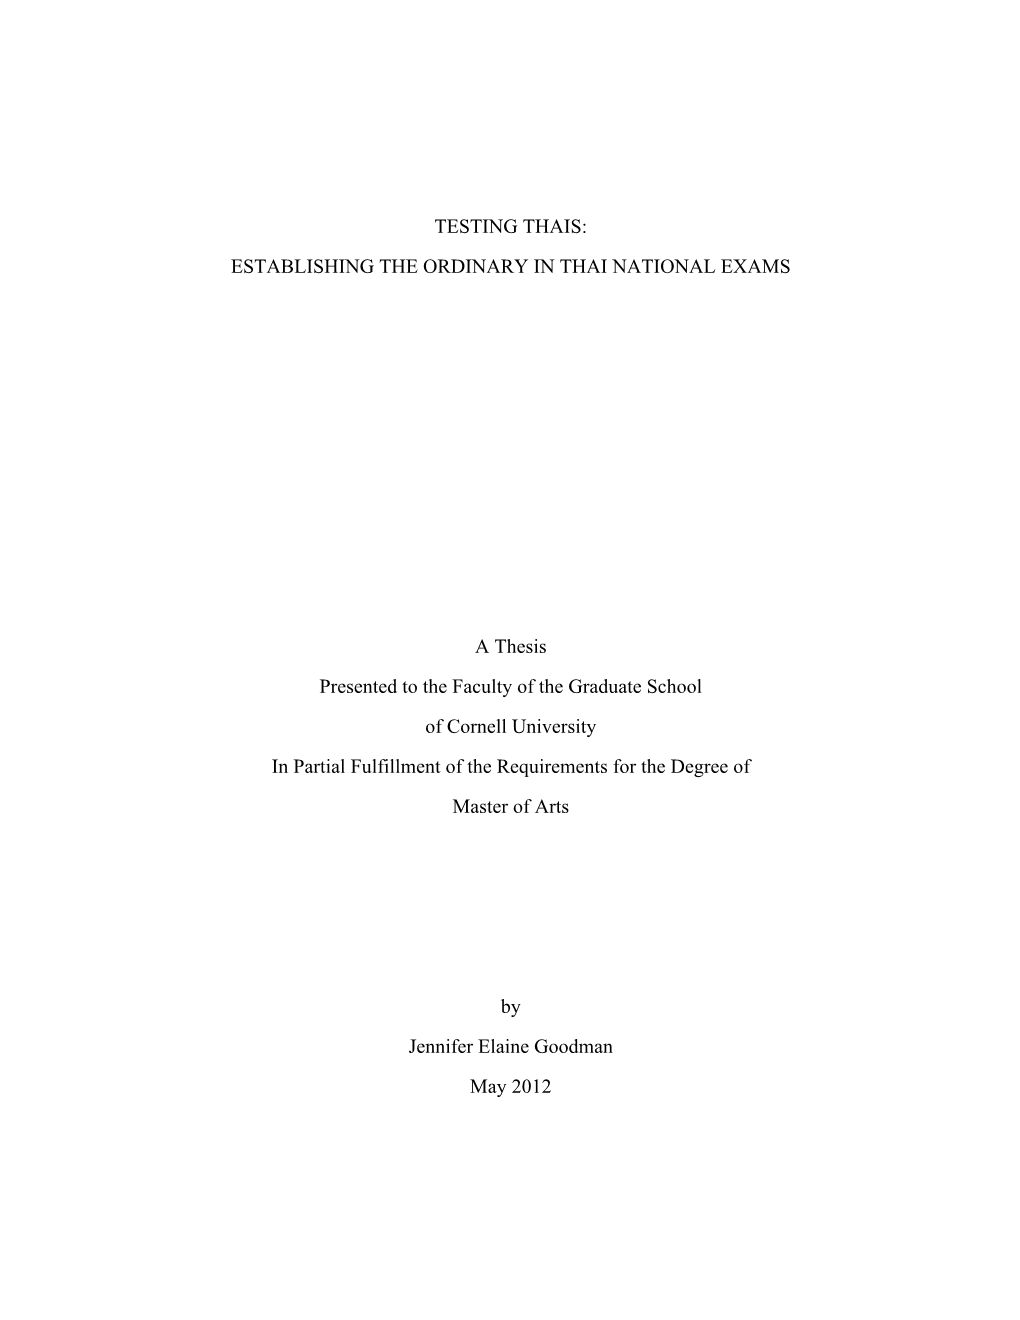 ESTABLISHING the ORDINARY in THAI NATIONAL EXAMS a Thesis